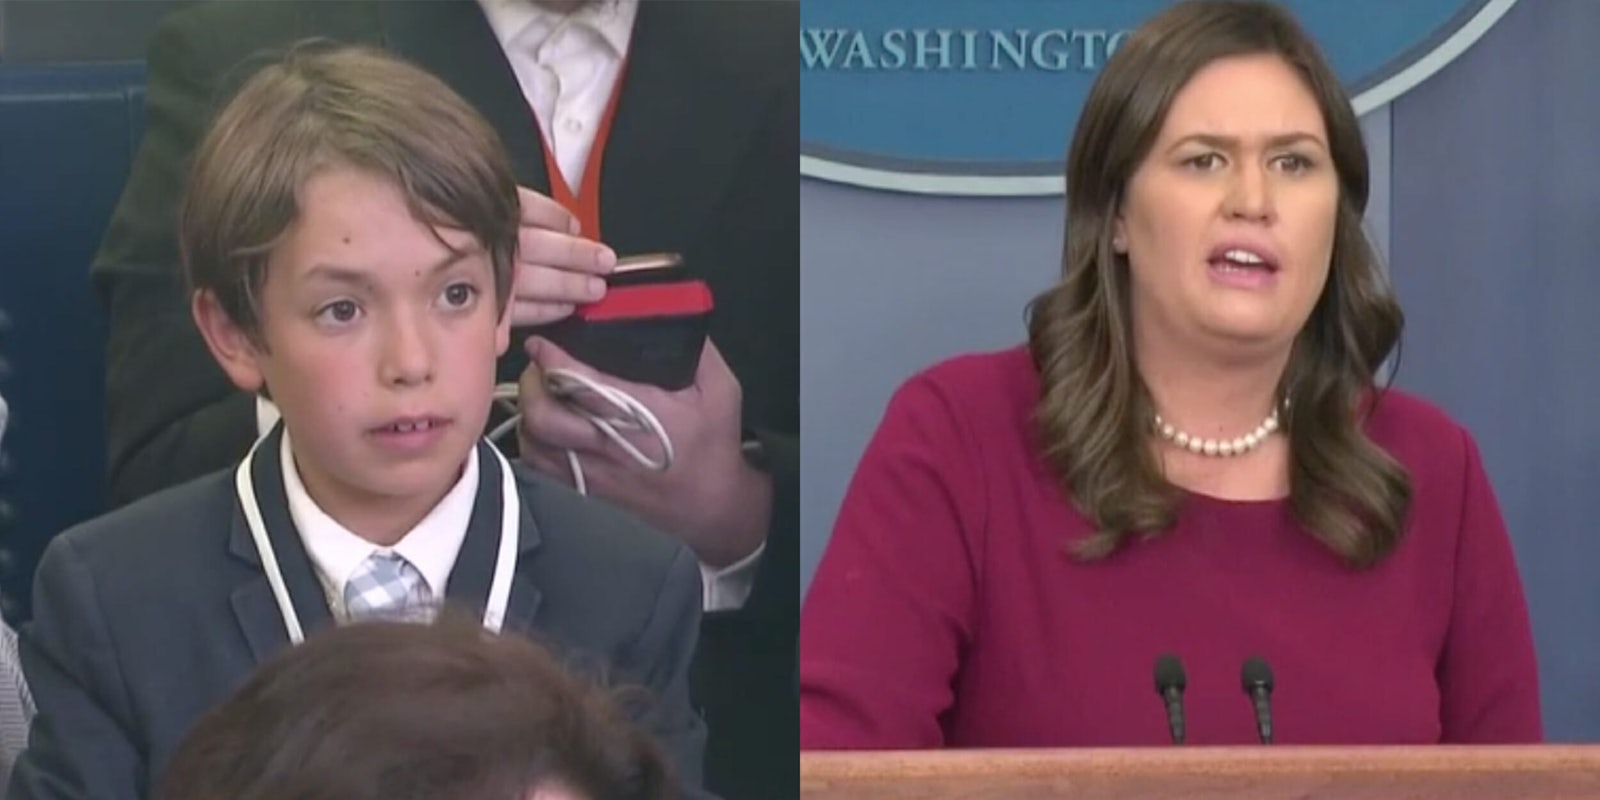 Sarah Huckabee Sanders choked up when a student journalist asked her a tough question about gun violence.